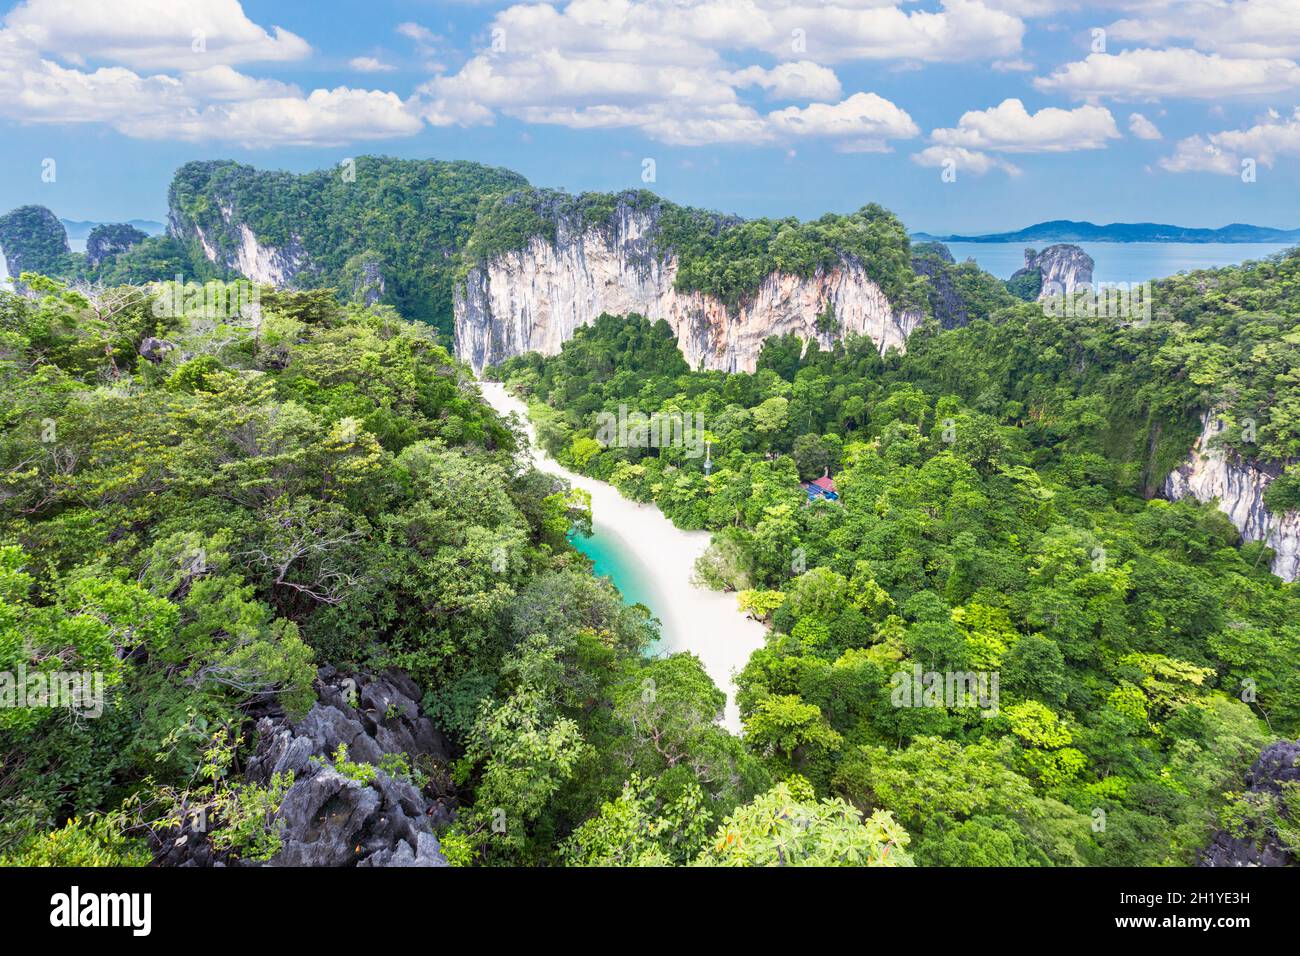 Koh Hong island view point to Beautiful scenery view 360 degree at Krabi province, Thailand. Stock Photo